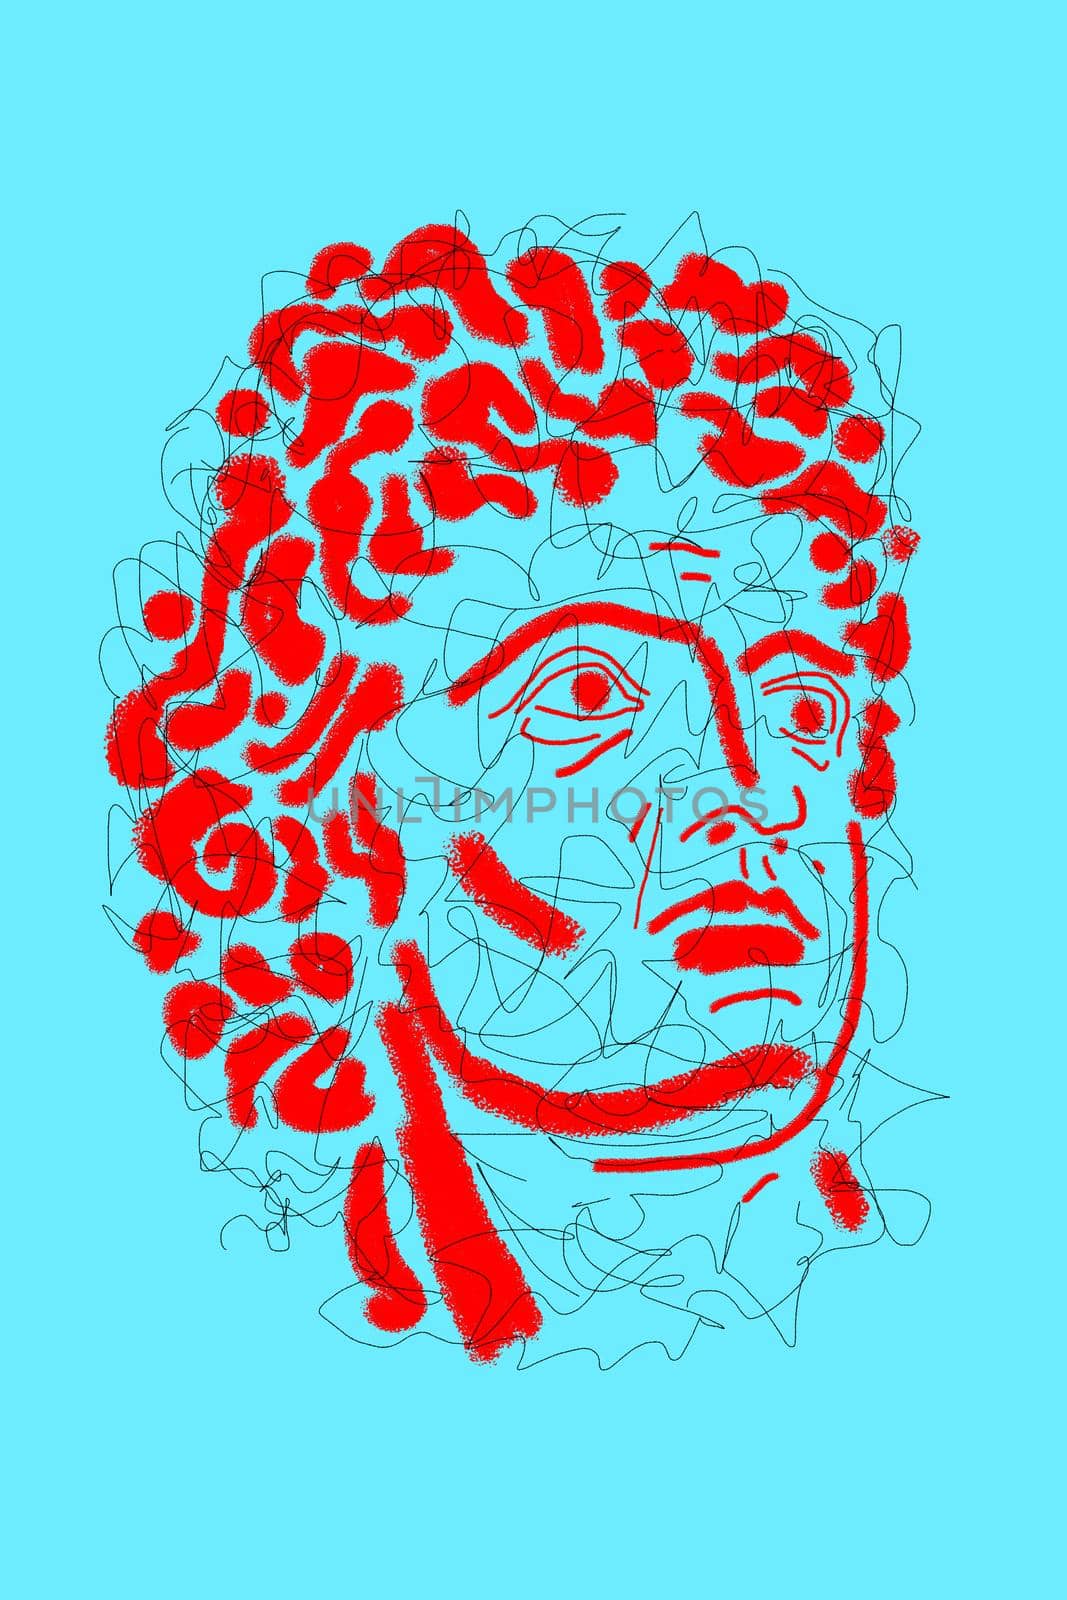 Line drawing of surreal face. Modern art creative concept image with ancient statue head. Crazy contemporary drawing in modern cubism style. Funky retro minimalist. Pop art poster. Zine culture.